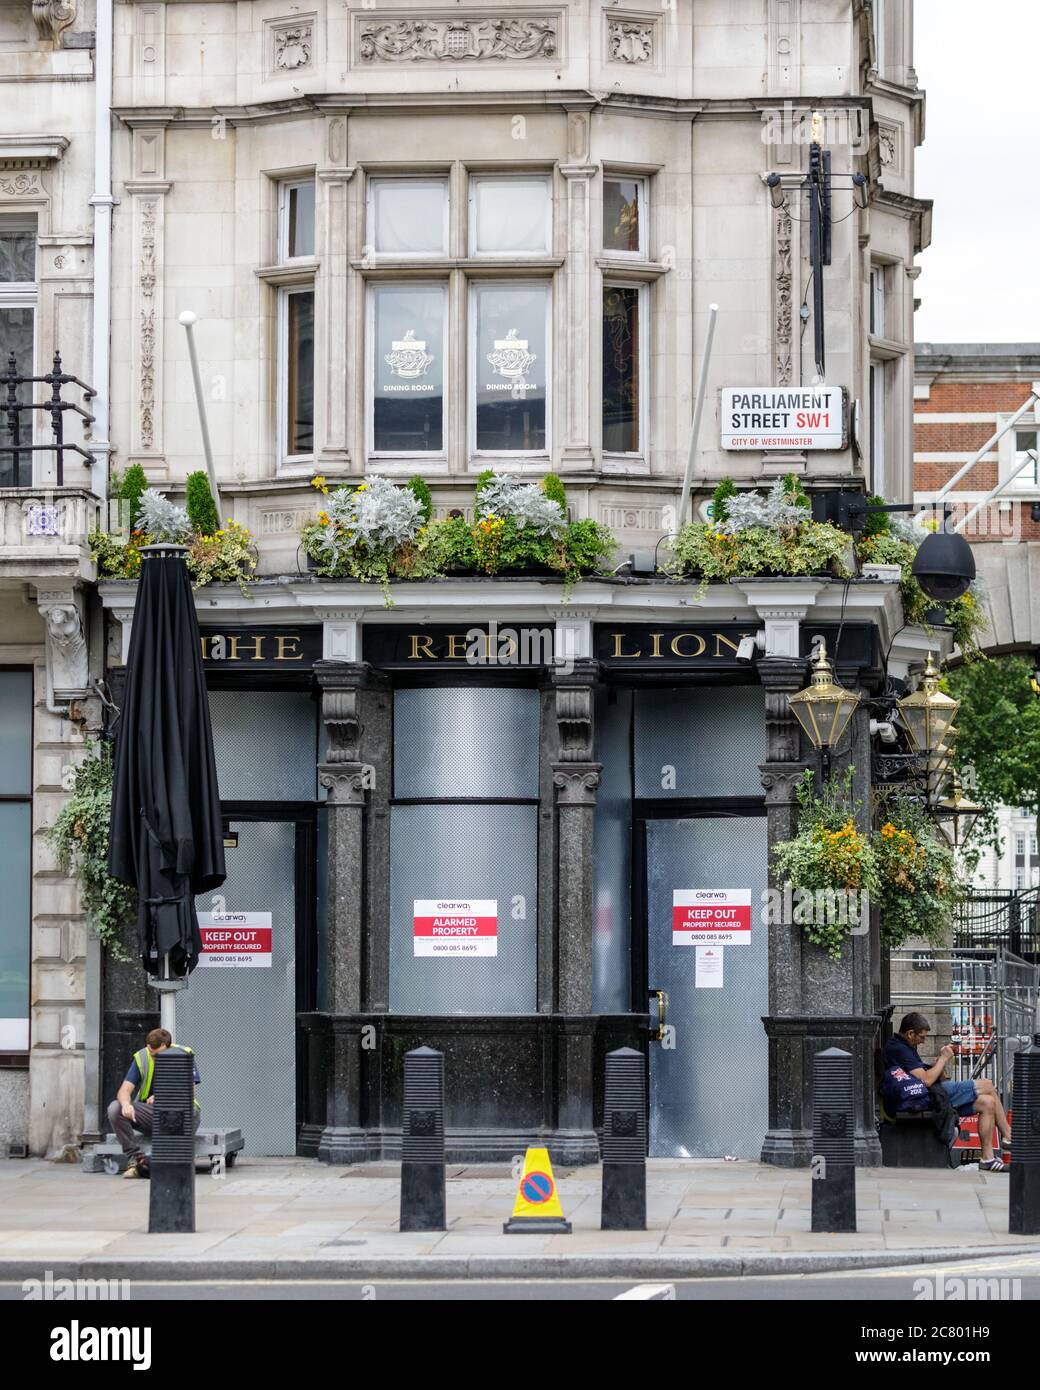 The Red Lion pub, famous drining hole opposite Downing Street in Westminster, closed and boarded up during the Covid 19 Coronavirus crisis, London, En Stock Photo